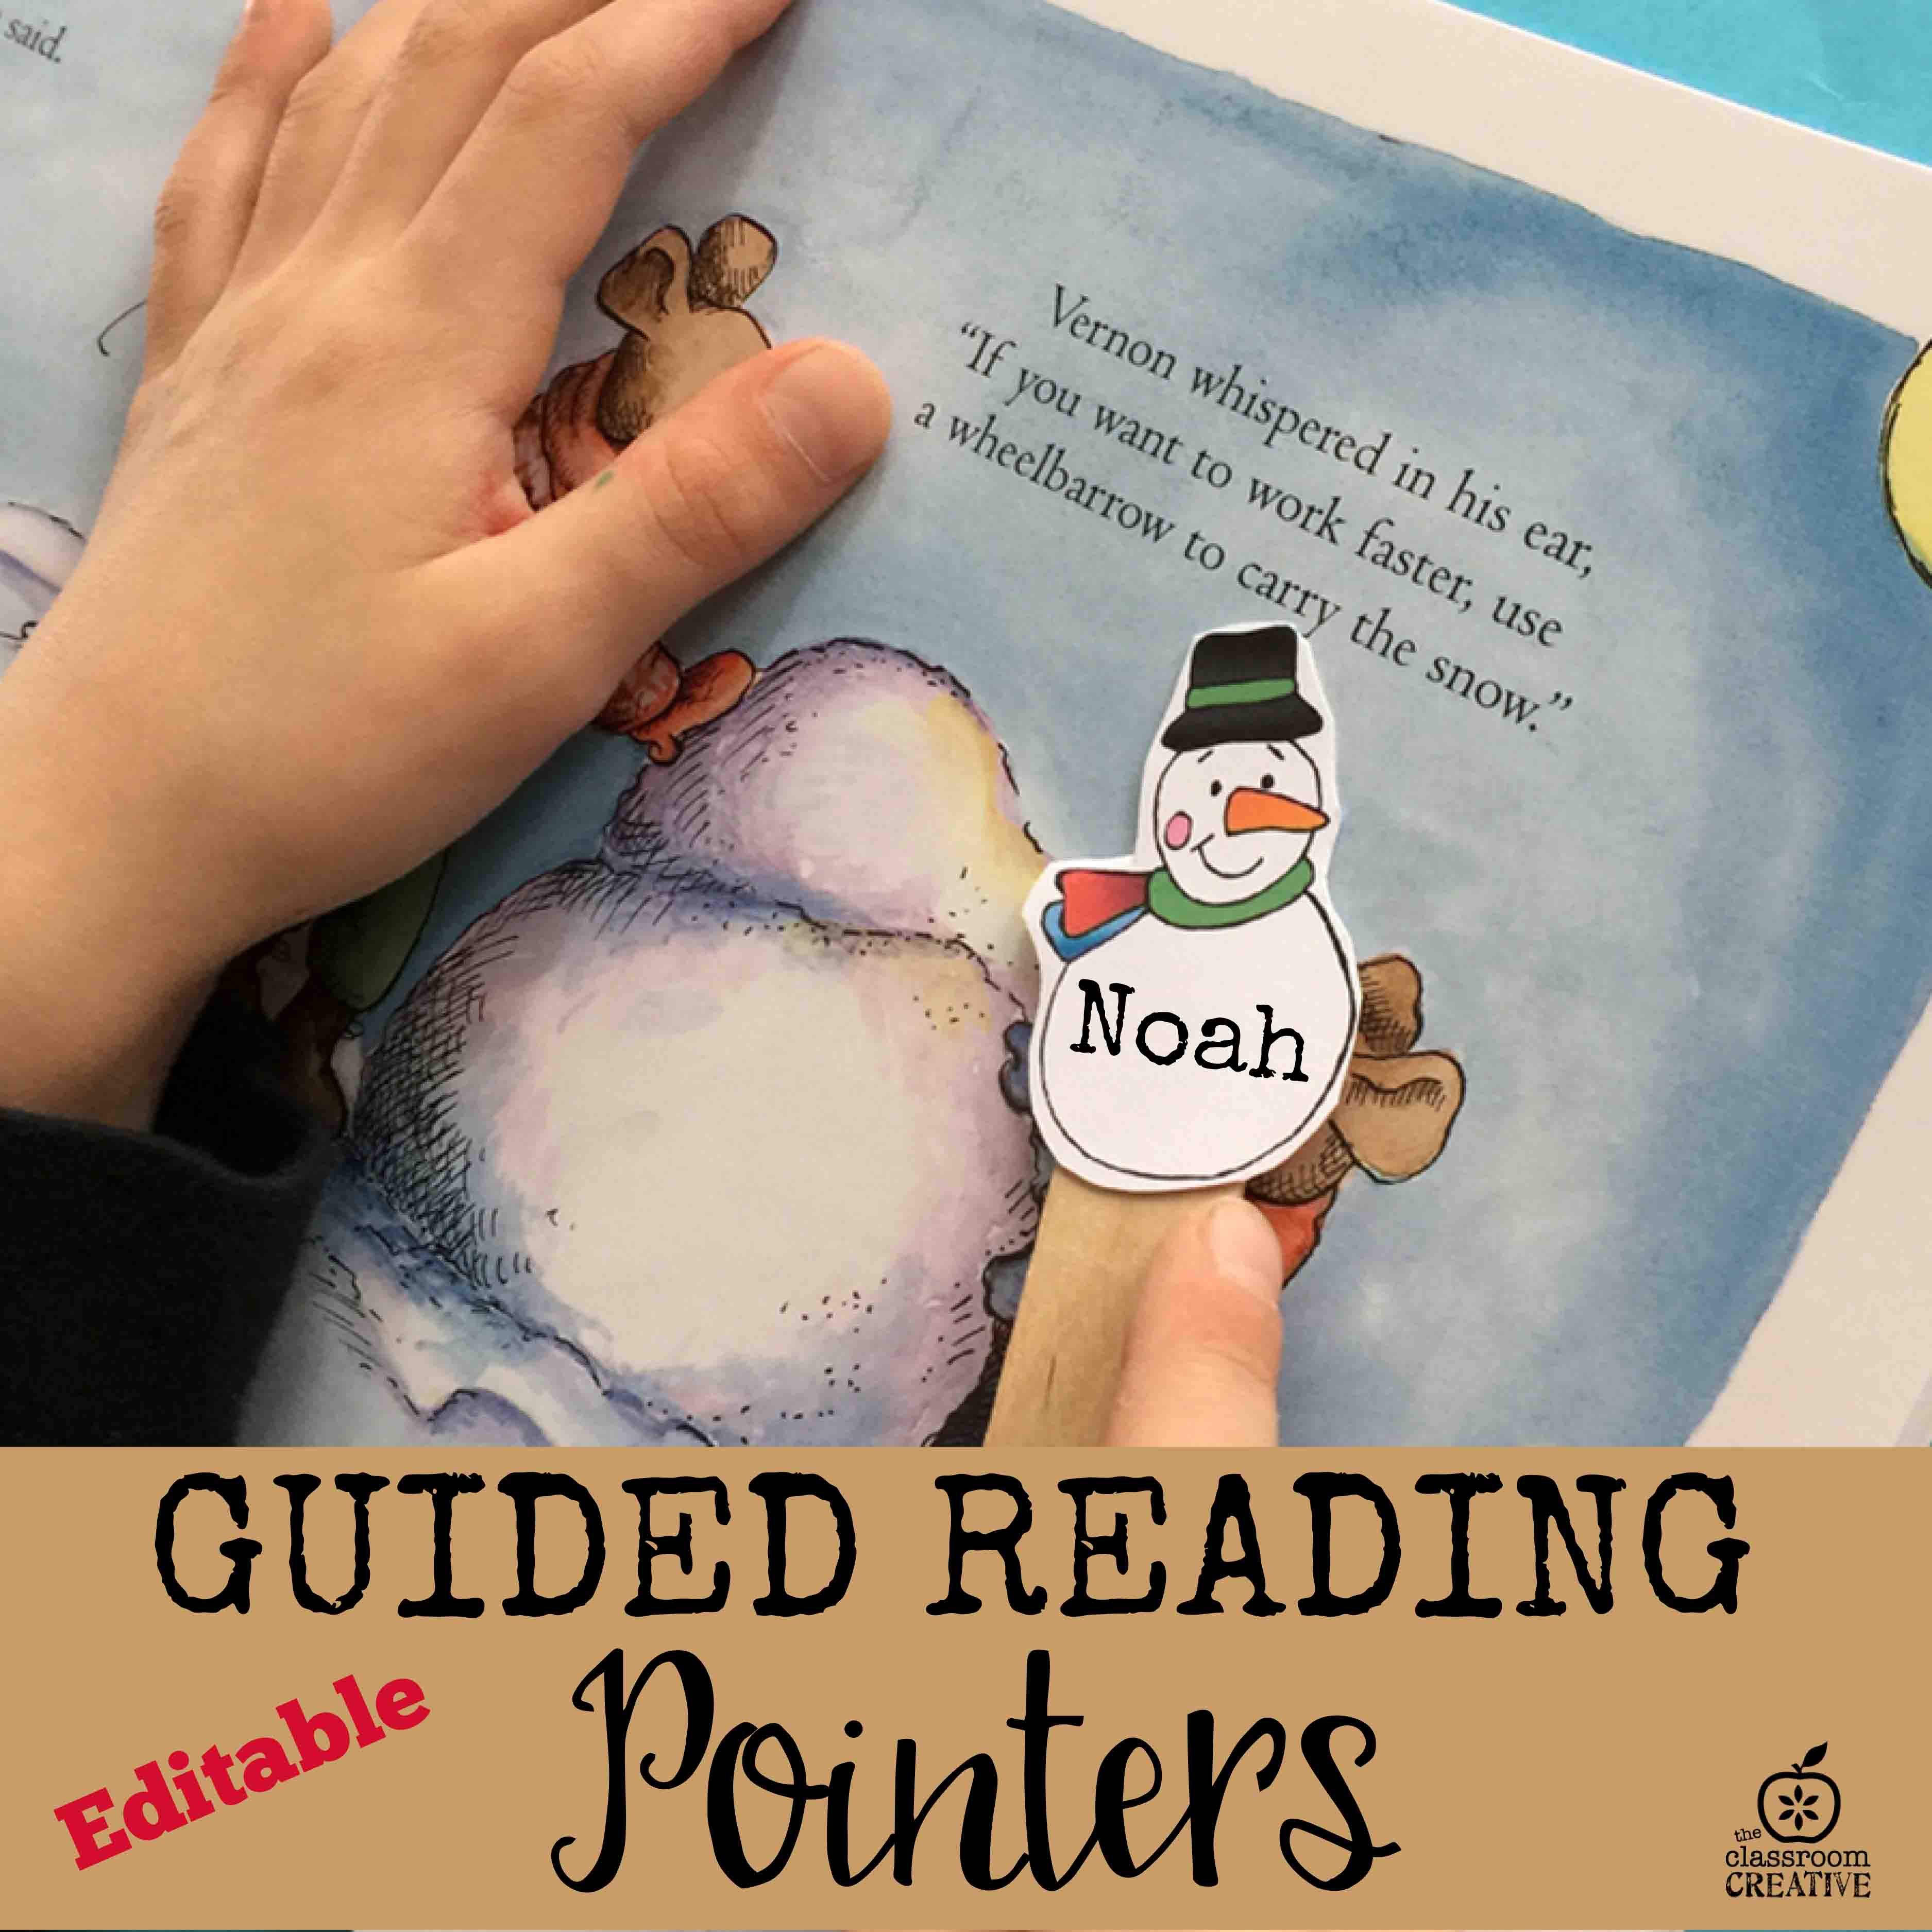 guided reading pointers editable